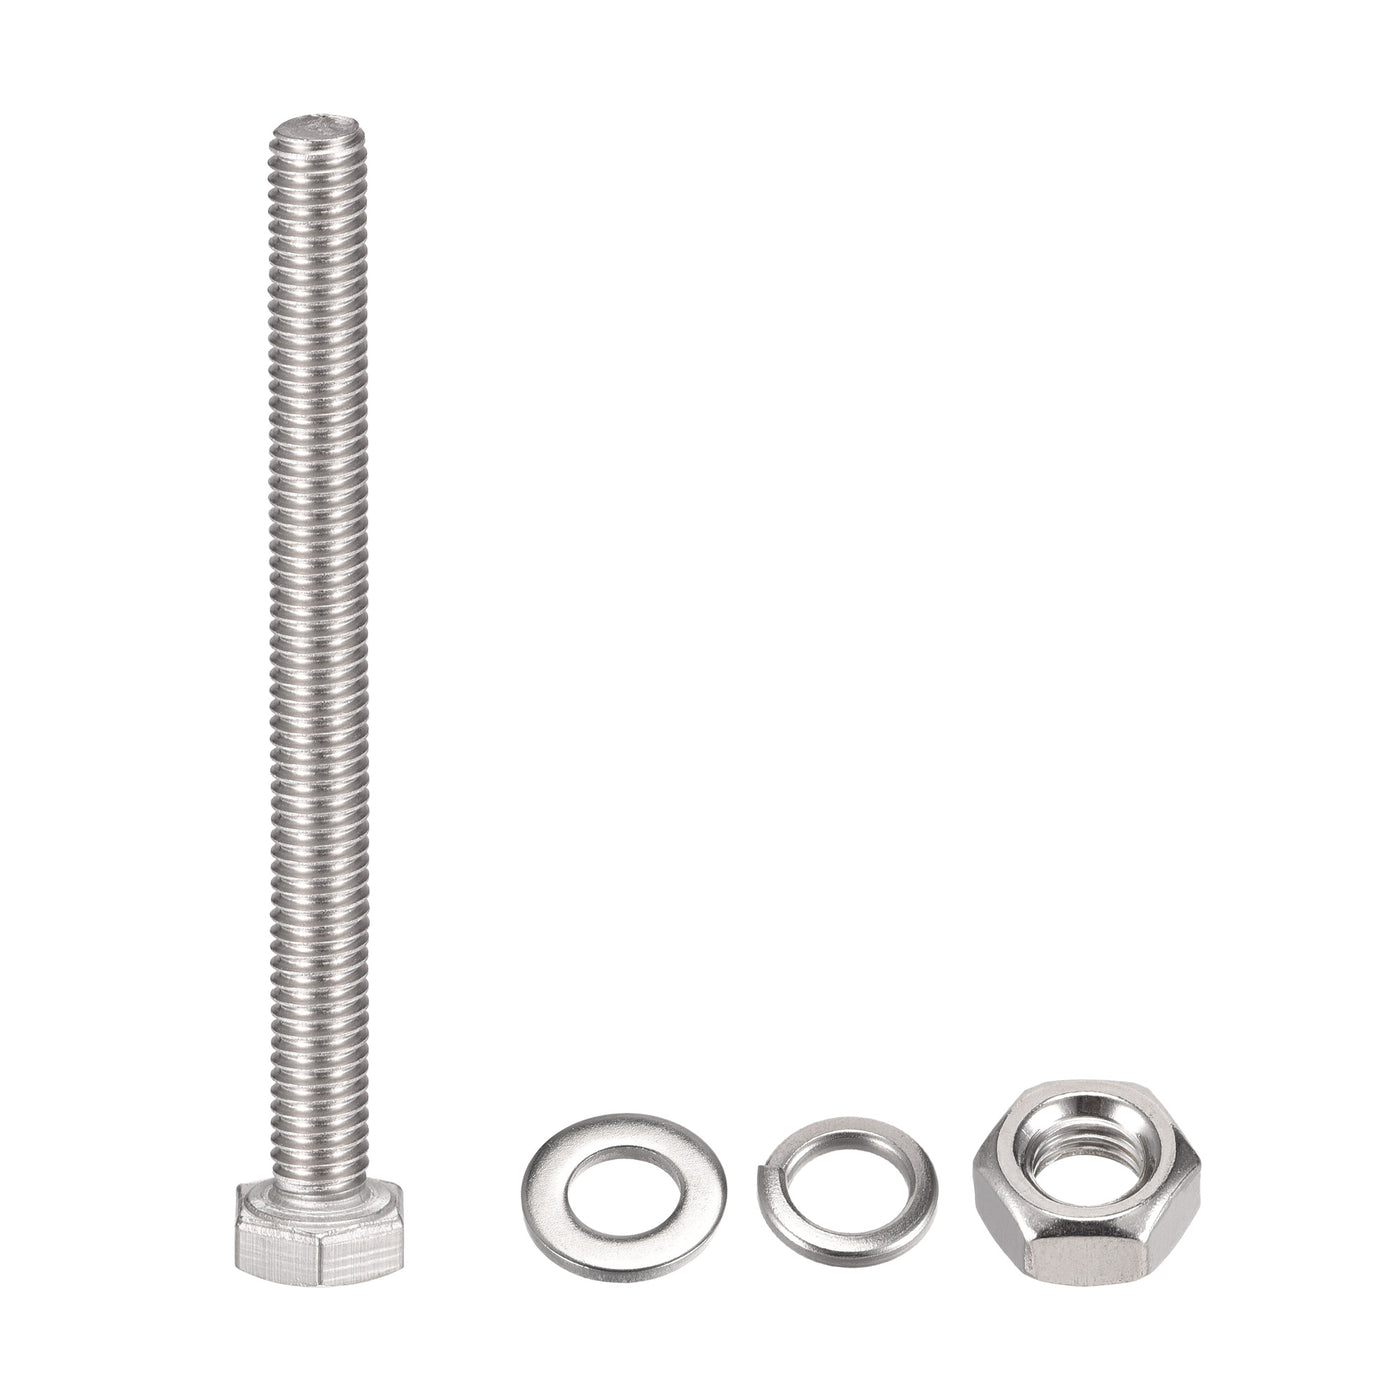 Uxcell Uxcell M6 x 80mm Hex Head Screws Bolts, Nuts, Flat & Lock Washers Kits, 304 Stainless Steel Fully Thread Hexagon Bolts 6 Sets